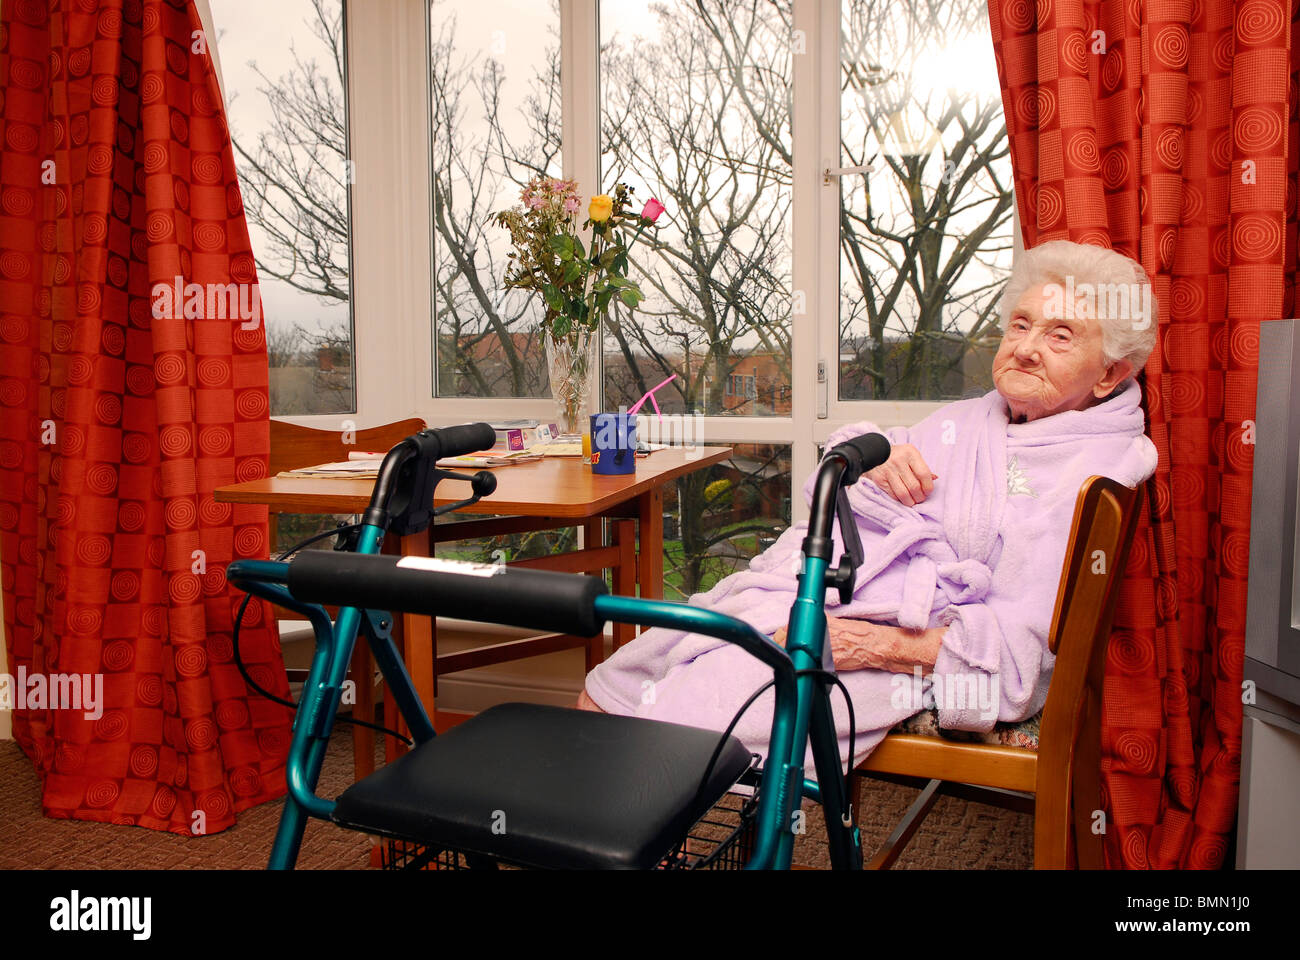 Elderly resident in her room at an old people's home, Wirral, UK. Stock Photo